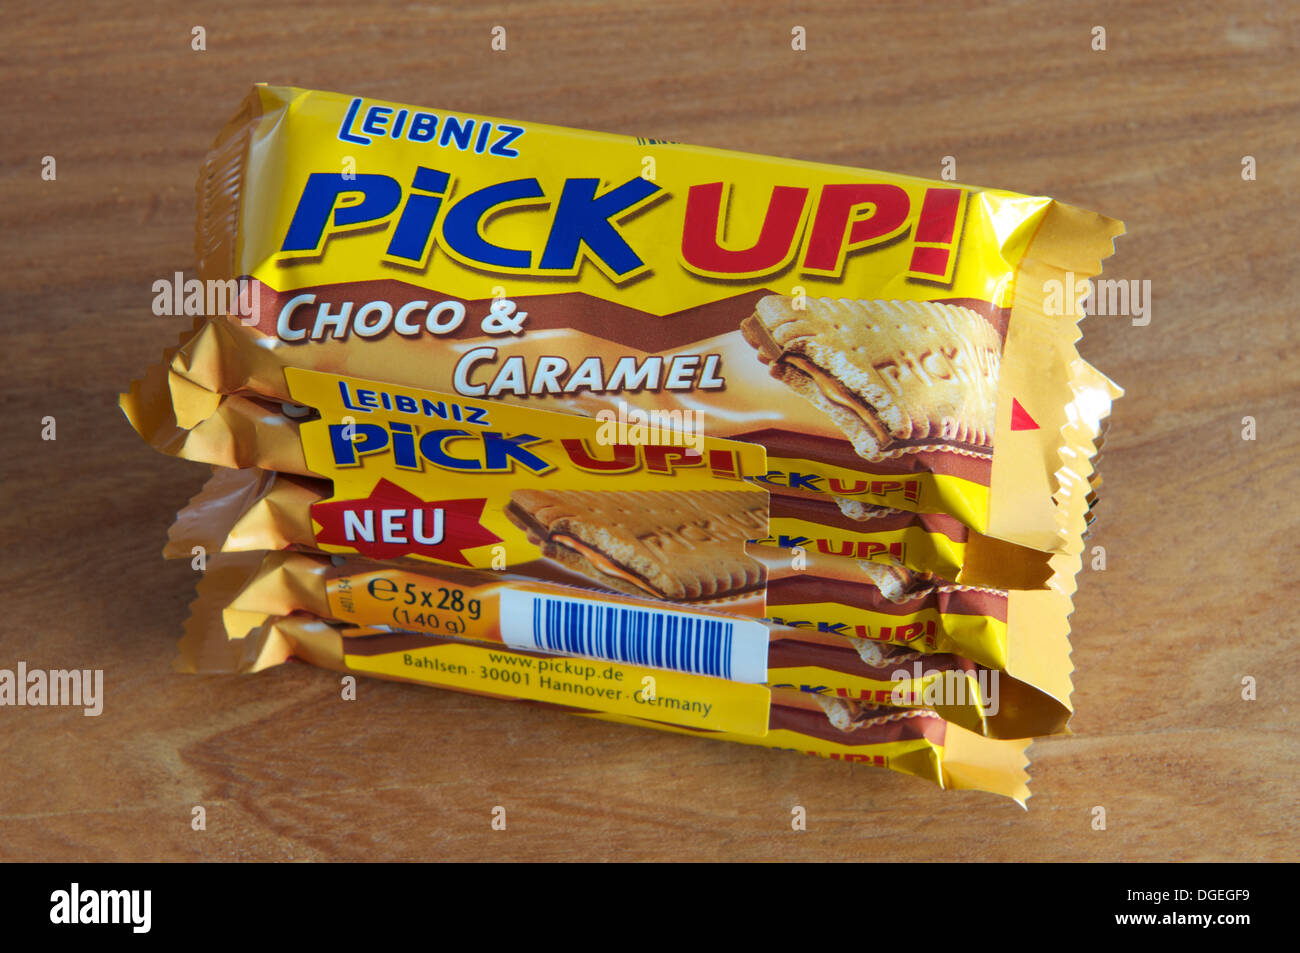 Pick up chocolate hi-res - photography stock biscuits images Alamy and